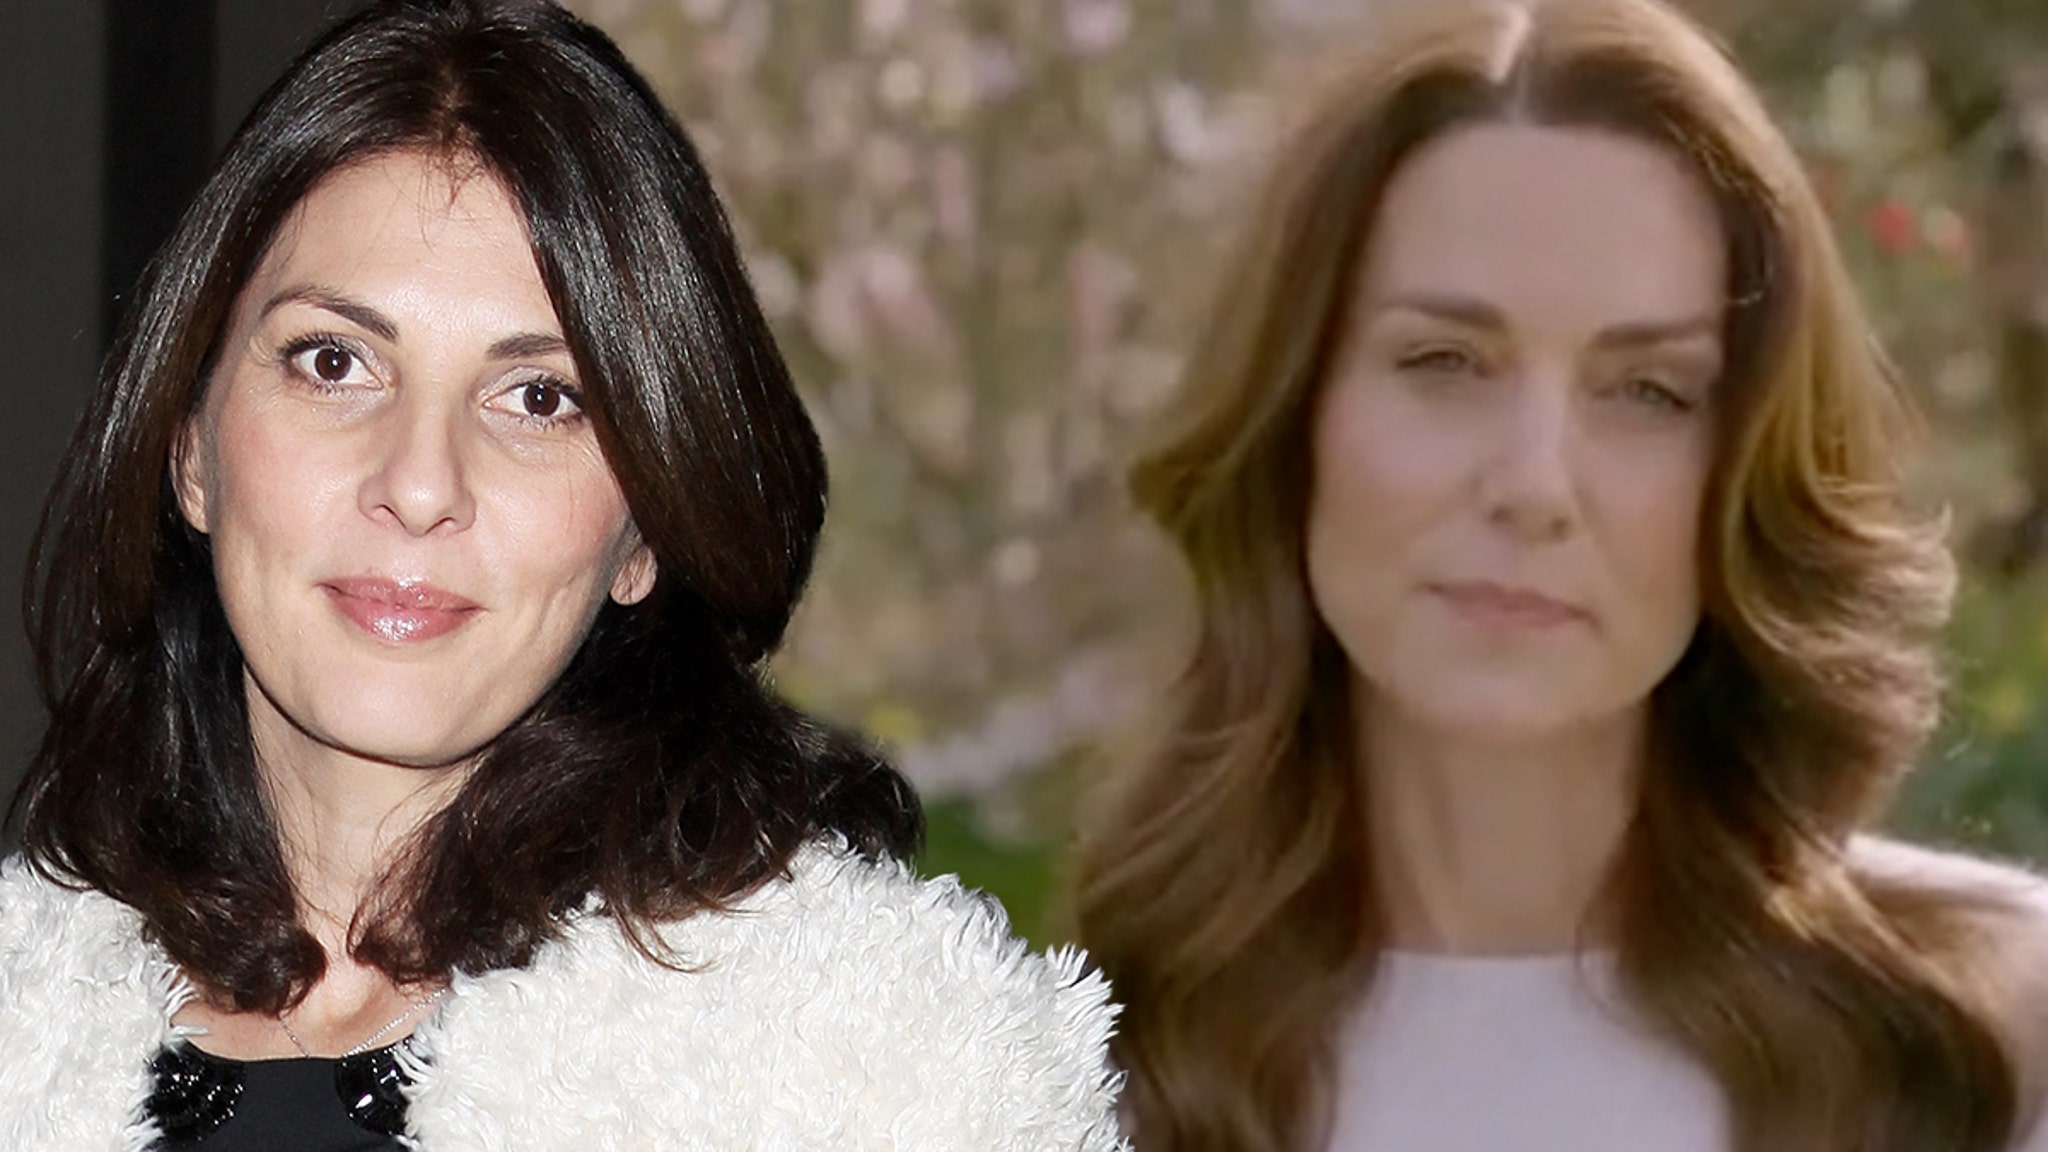 Actress Gina Bellman Seems Inspired By Kate Middleton to Reveal Own Cancer